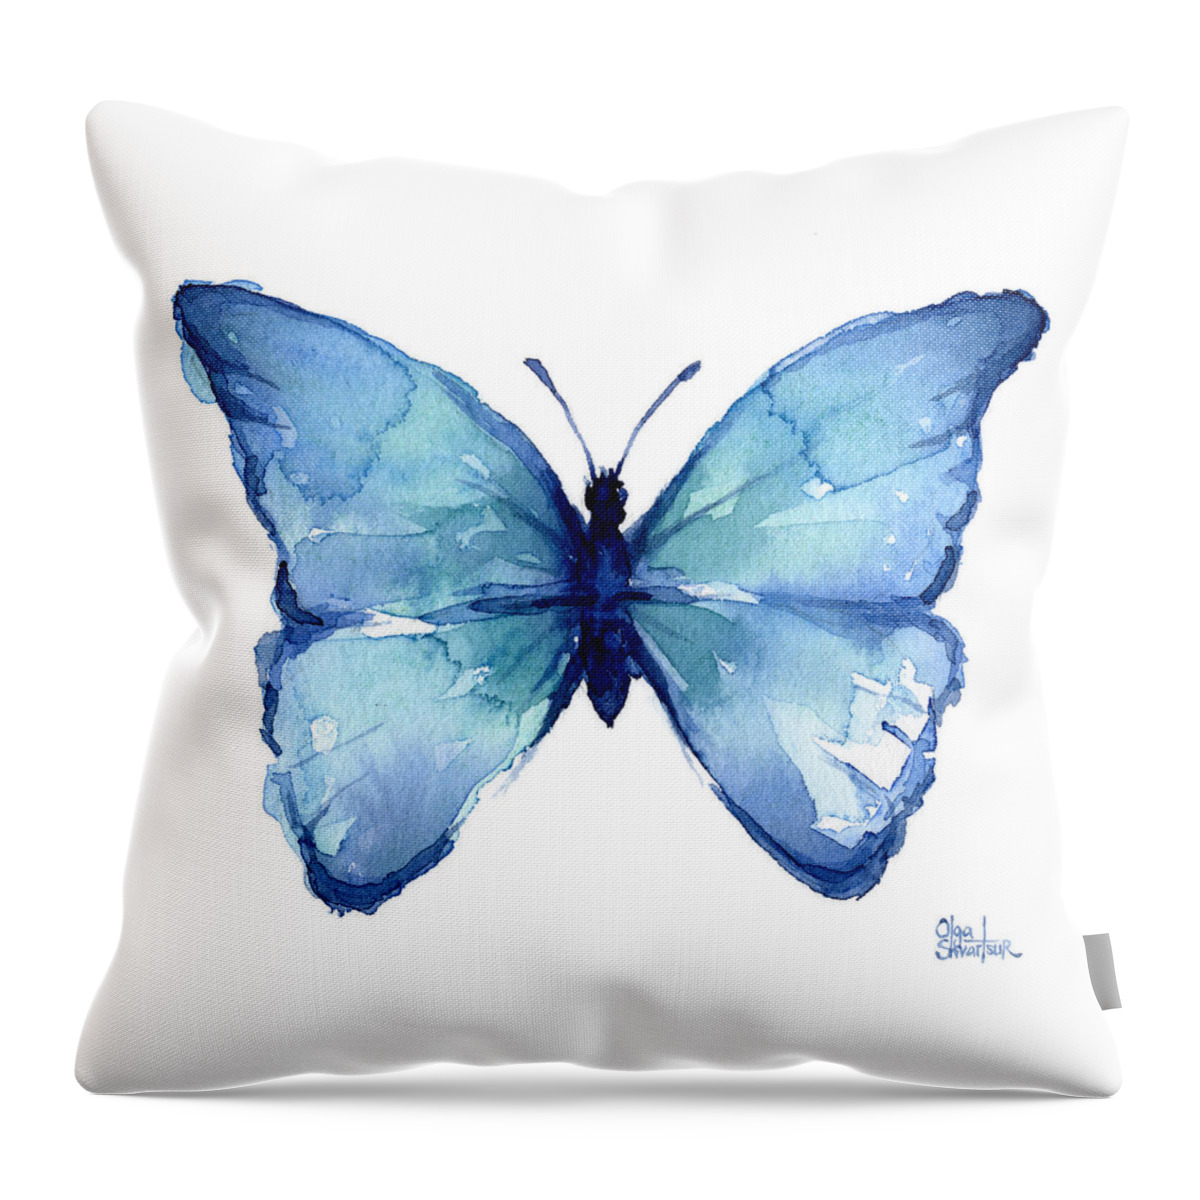 Watercolor Throw Pillow featuring the painting Blue Butterfly Watercolor by Olga Shvartsur